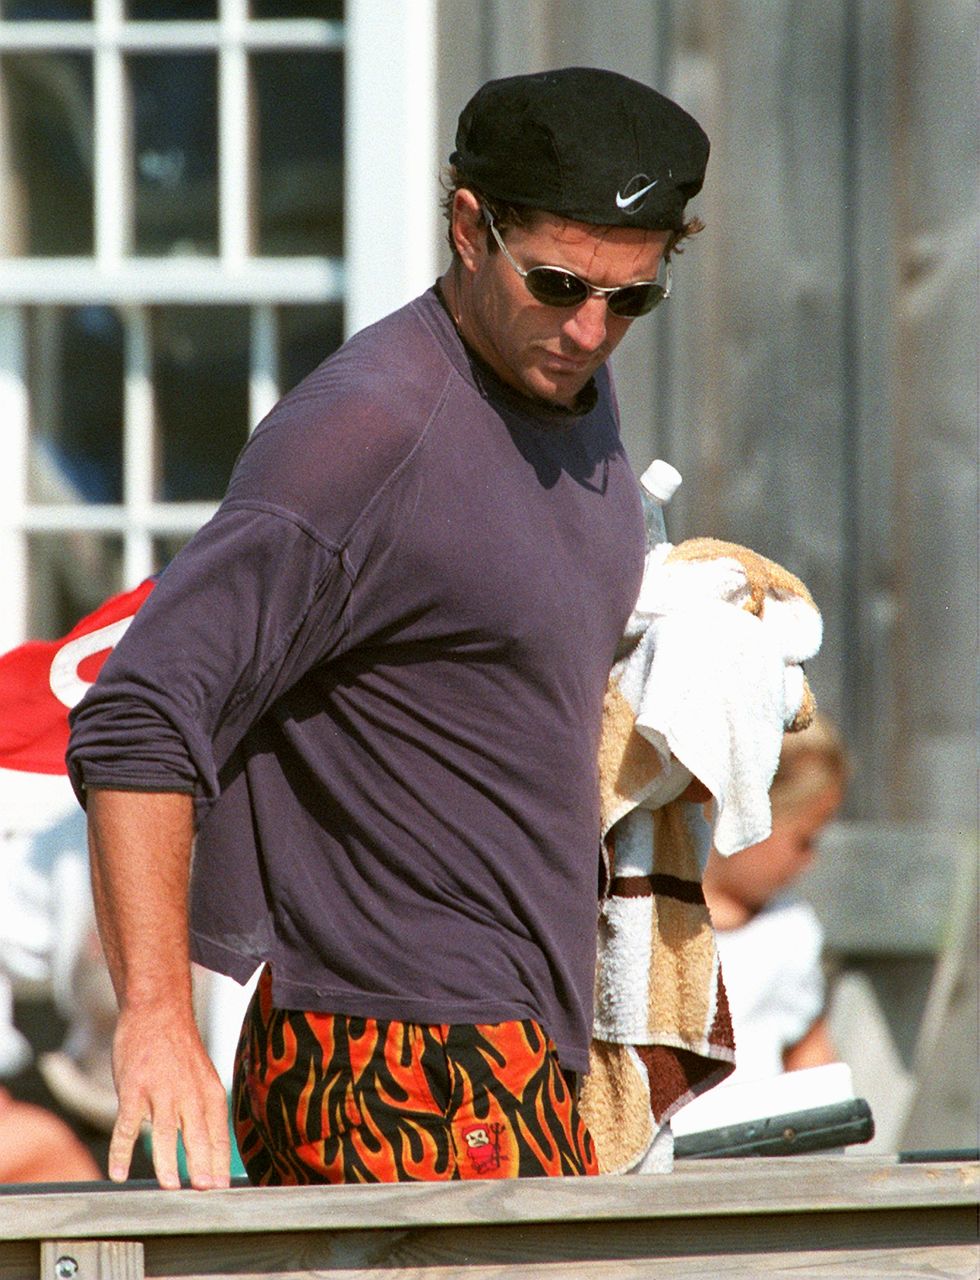 hyannis port   august 23 john kennedy, jr walks along a pier near the kennedy compound after a few hours of sailing off hyannis port the kennedy clan gathered for the annual get together at the compound photo by john tlumackithe boston globe via getty images